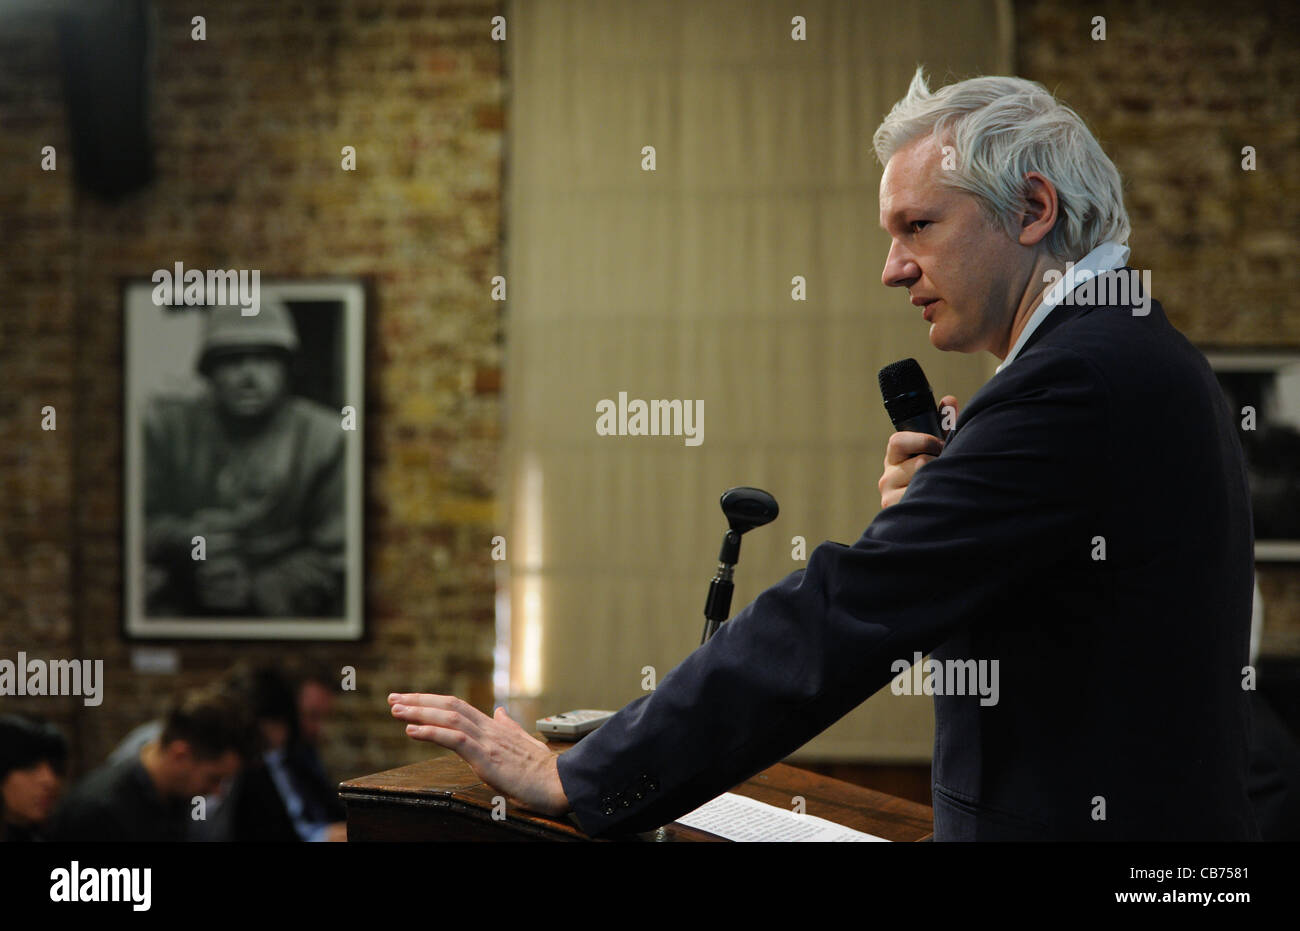 WikiLeaks founder Julian Assange speaks at a WikiLeaks press conference at The Frontline Club in London, UK on Monday 24th Oct. Stock Photo